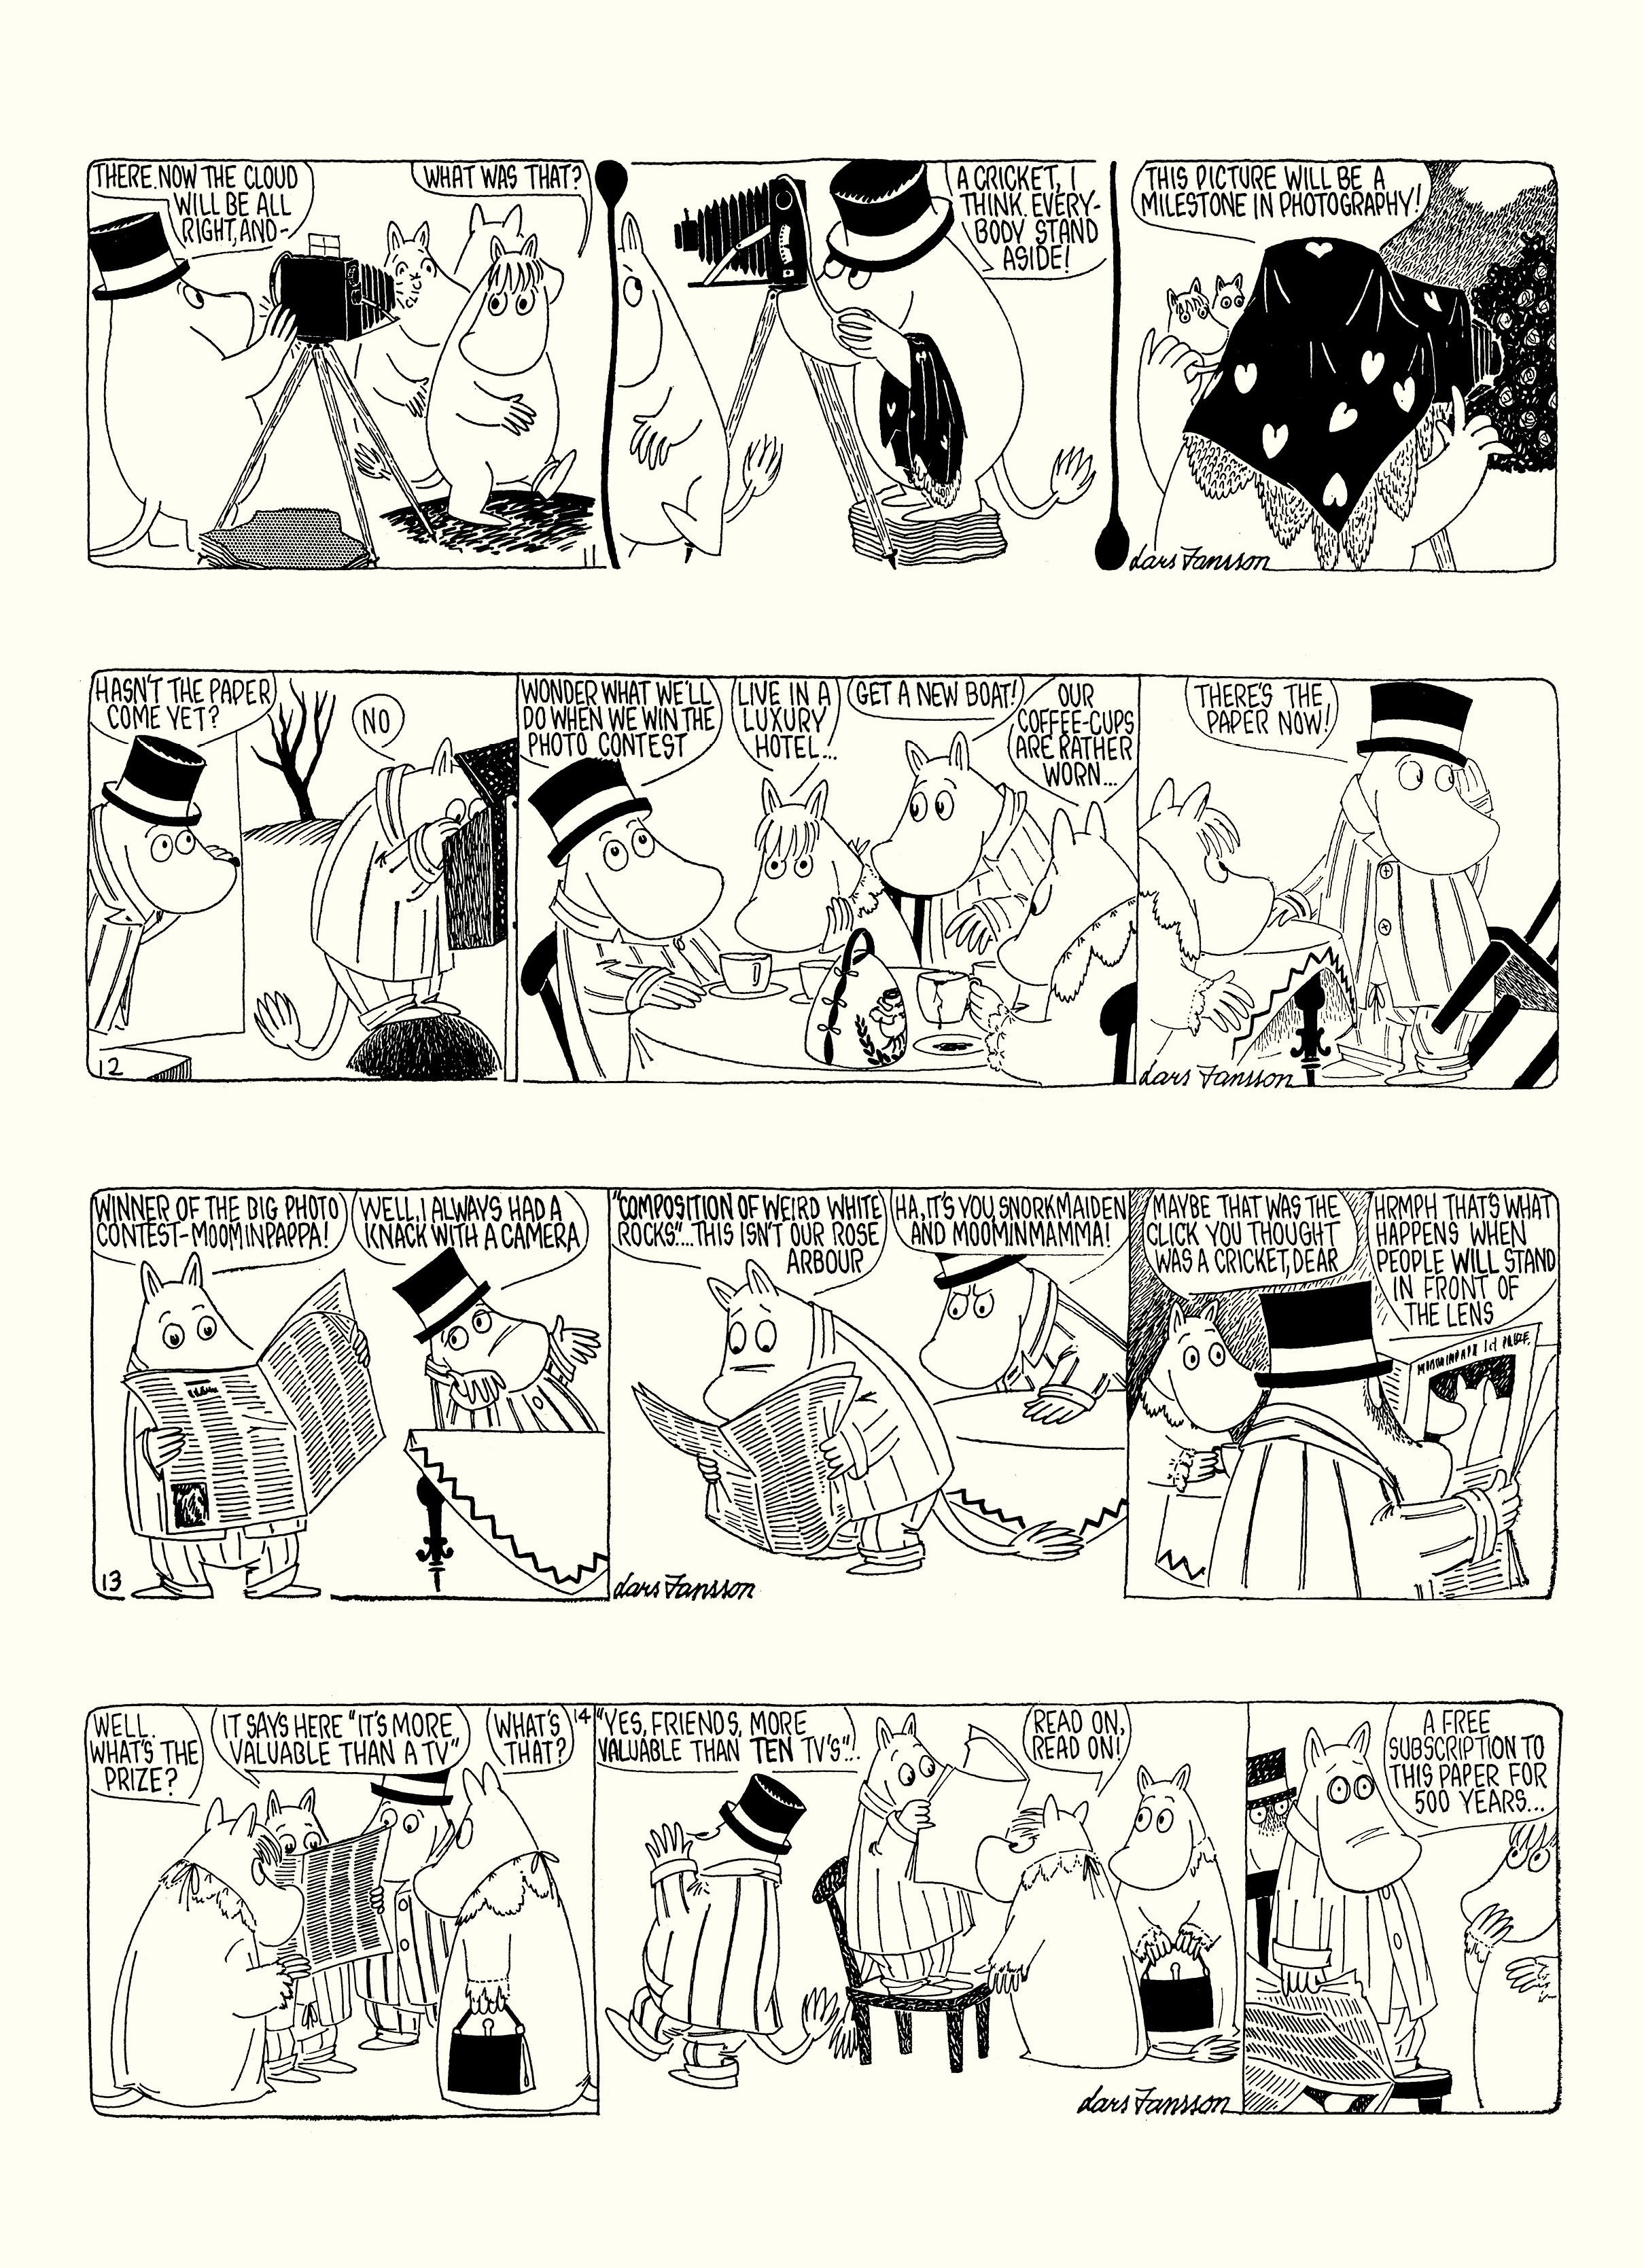 Read online Moomin: The Complete Lars Jansson Comic Strip comic -  Issue # TPB 8 - 30